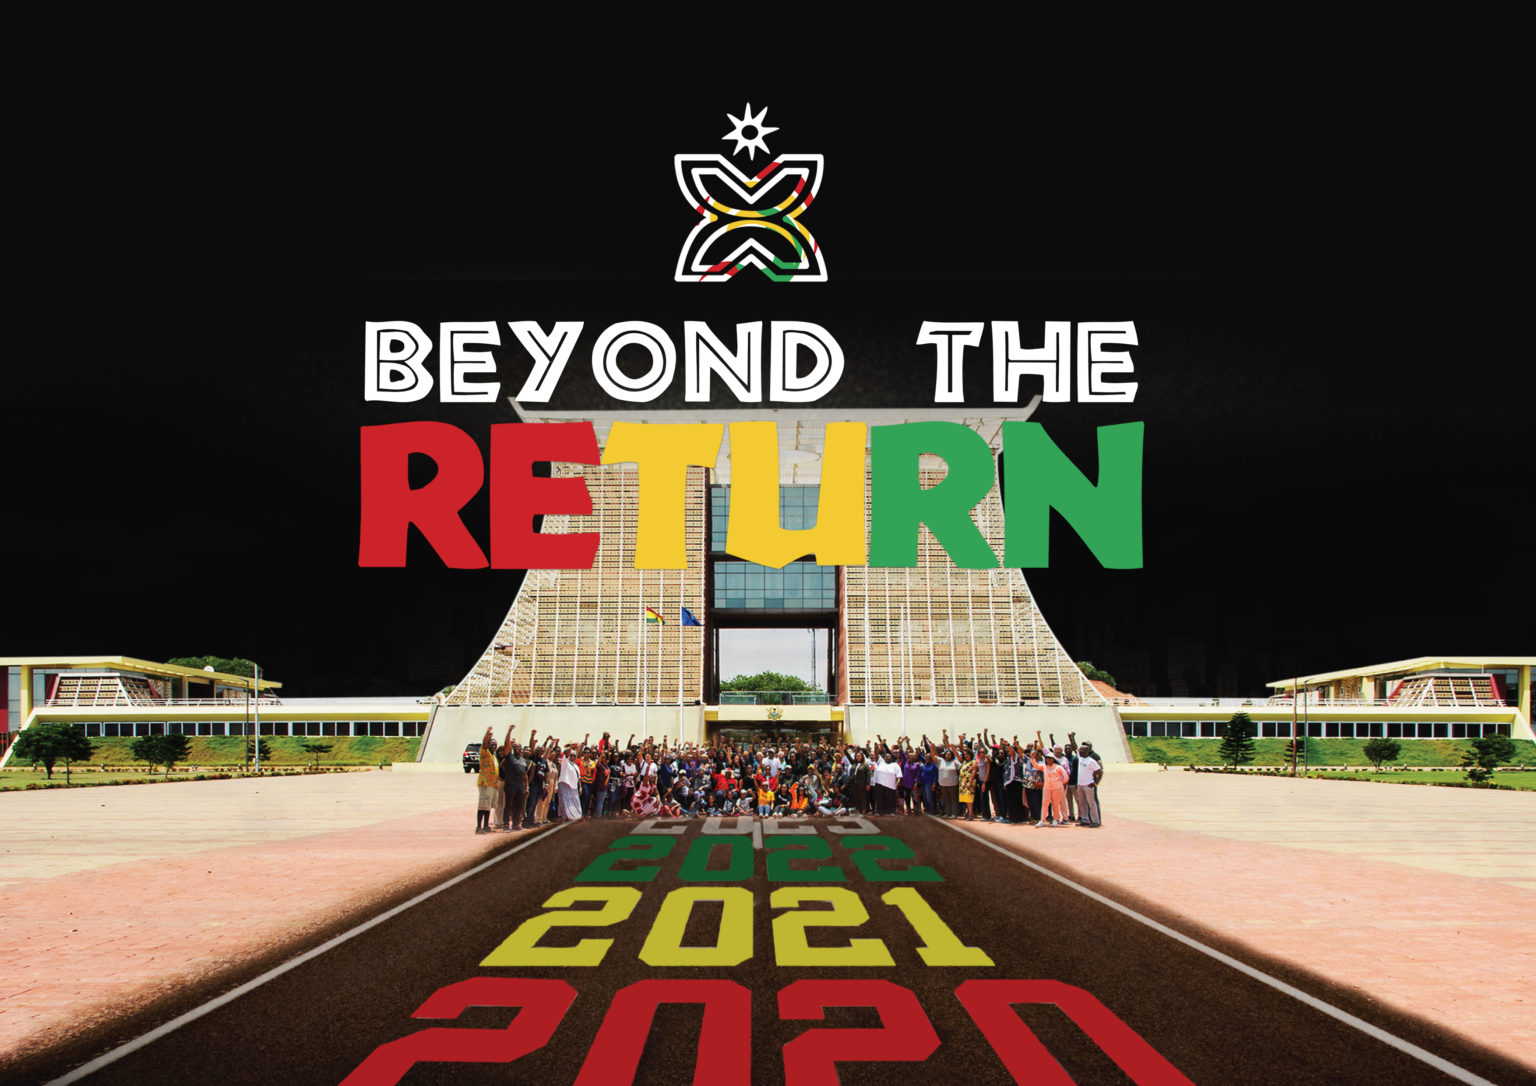 list of activities to be celebrated during Beyond the Return